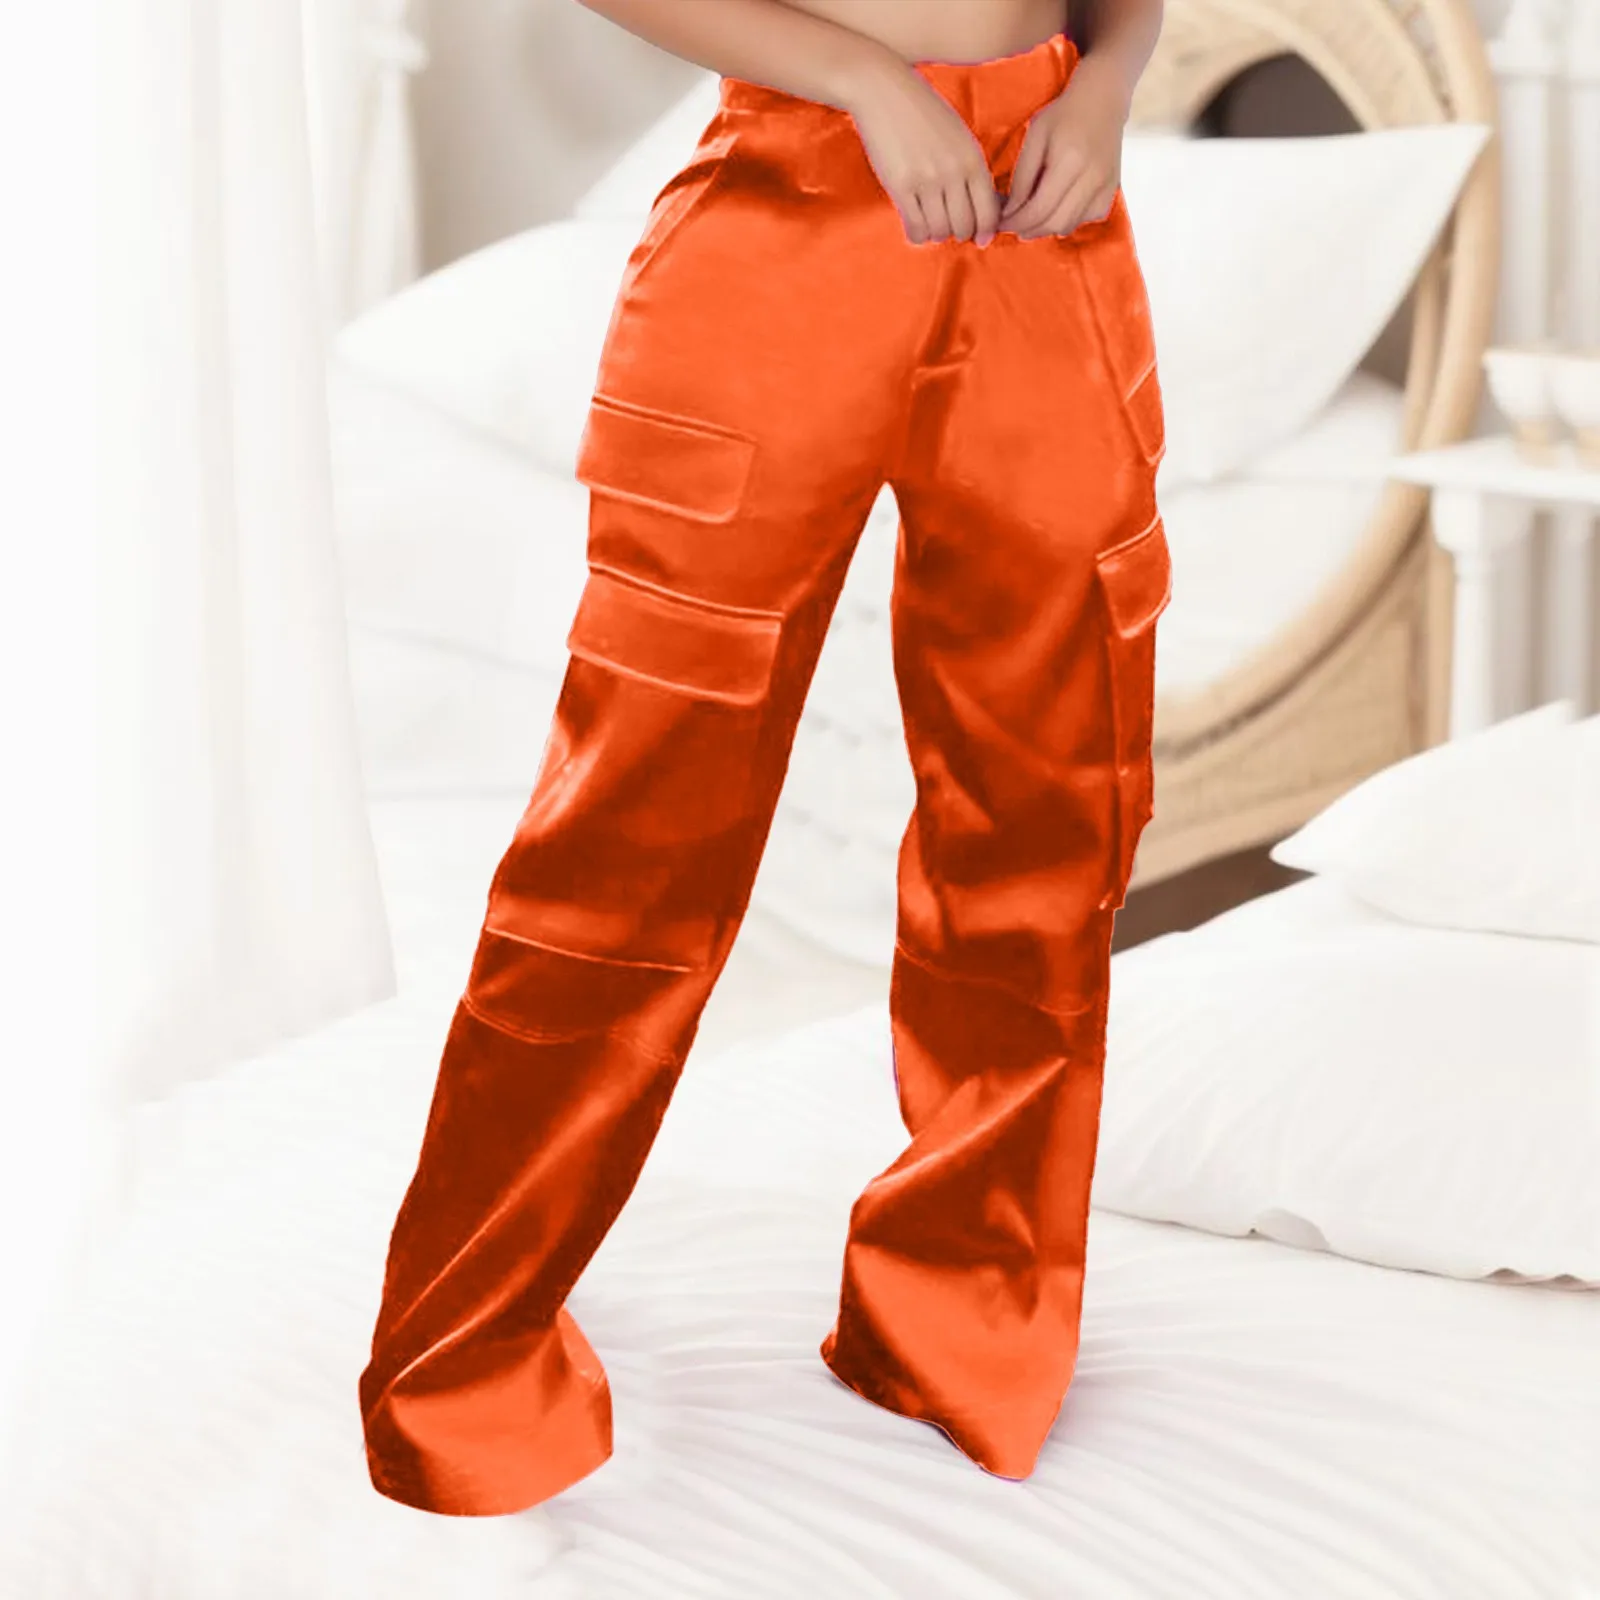 

Casual Fashionable Women's Pants Multiple Pocket Solid Color Loose High Waisted Rise Satin Soft Comfortable Pants